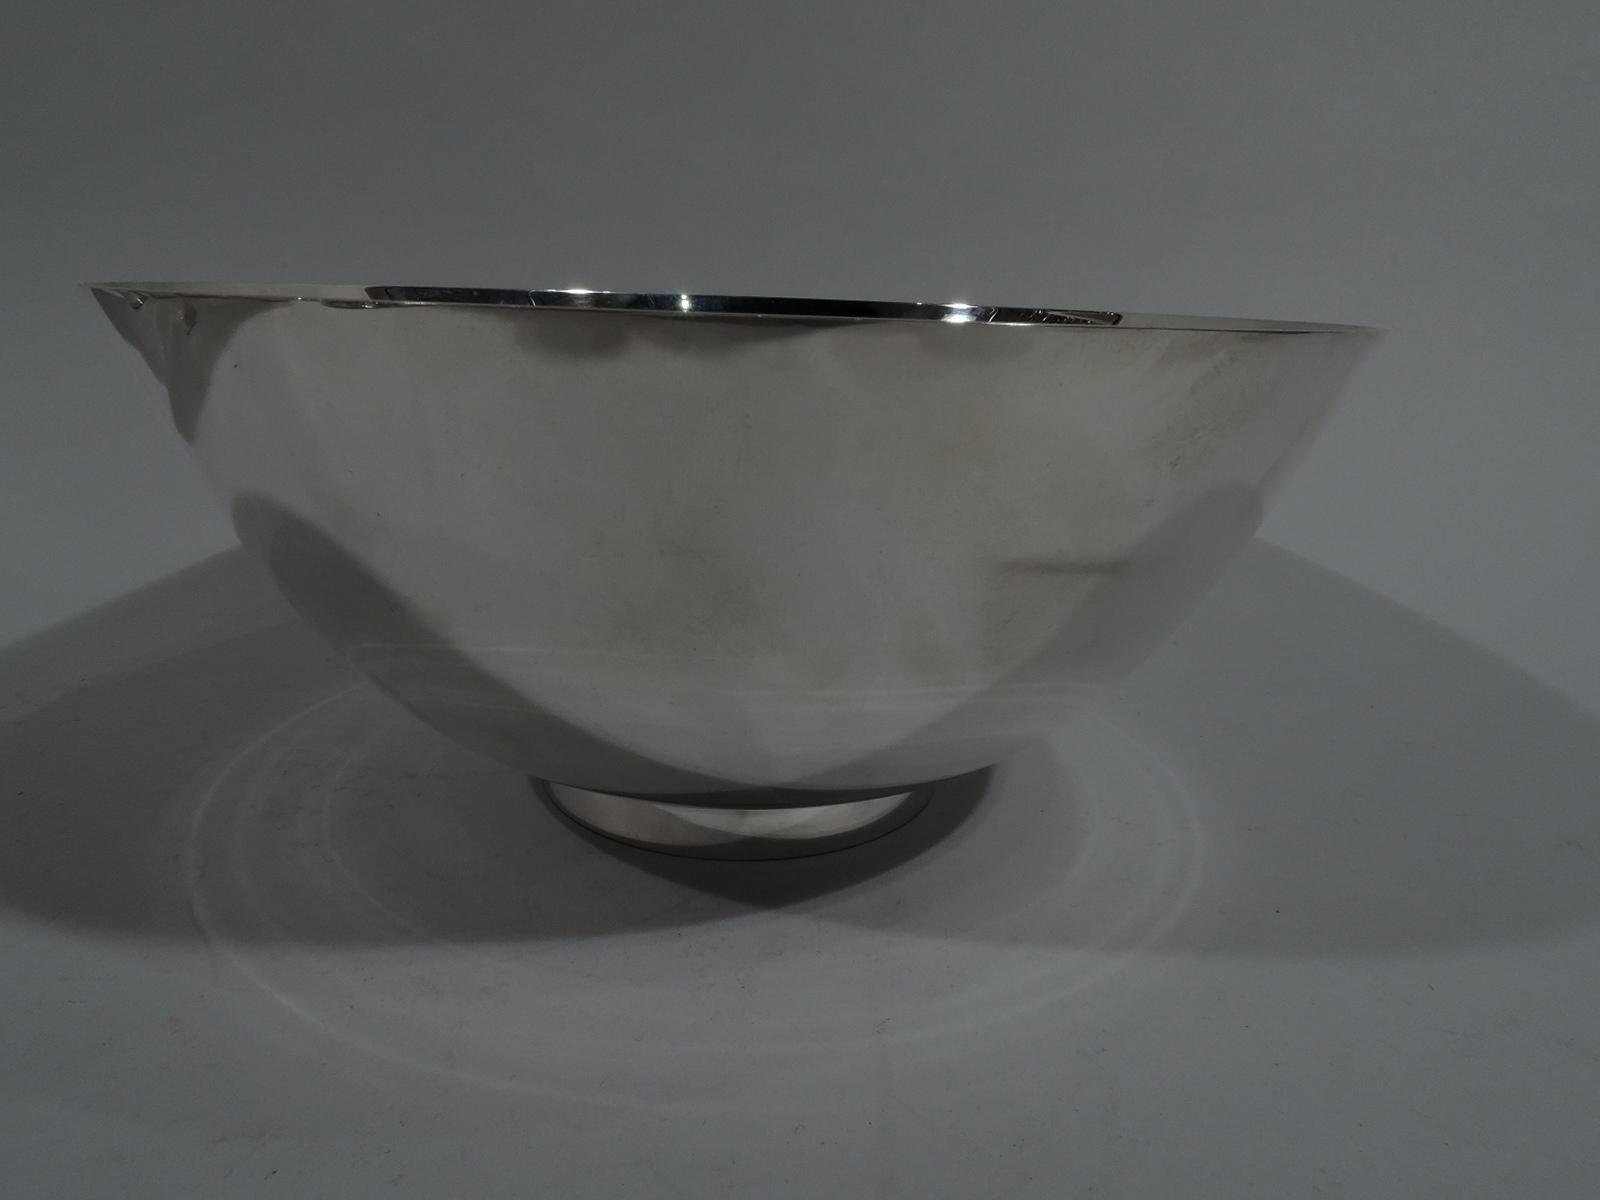 American Colonial sterling silver bowl. Made by Tiffany in New York, circa 1965. Bowl has curved sides and straight circular foot. Spare historic design that works equally well in Modern interiors. Hallmark includes pattern no. 19750 and phrase: